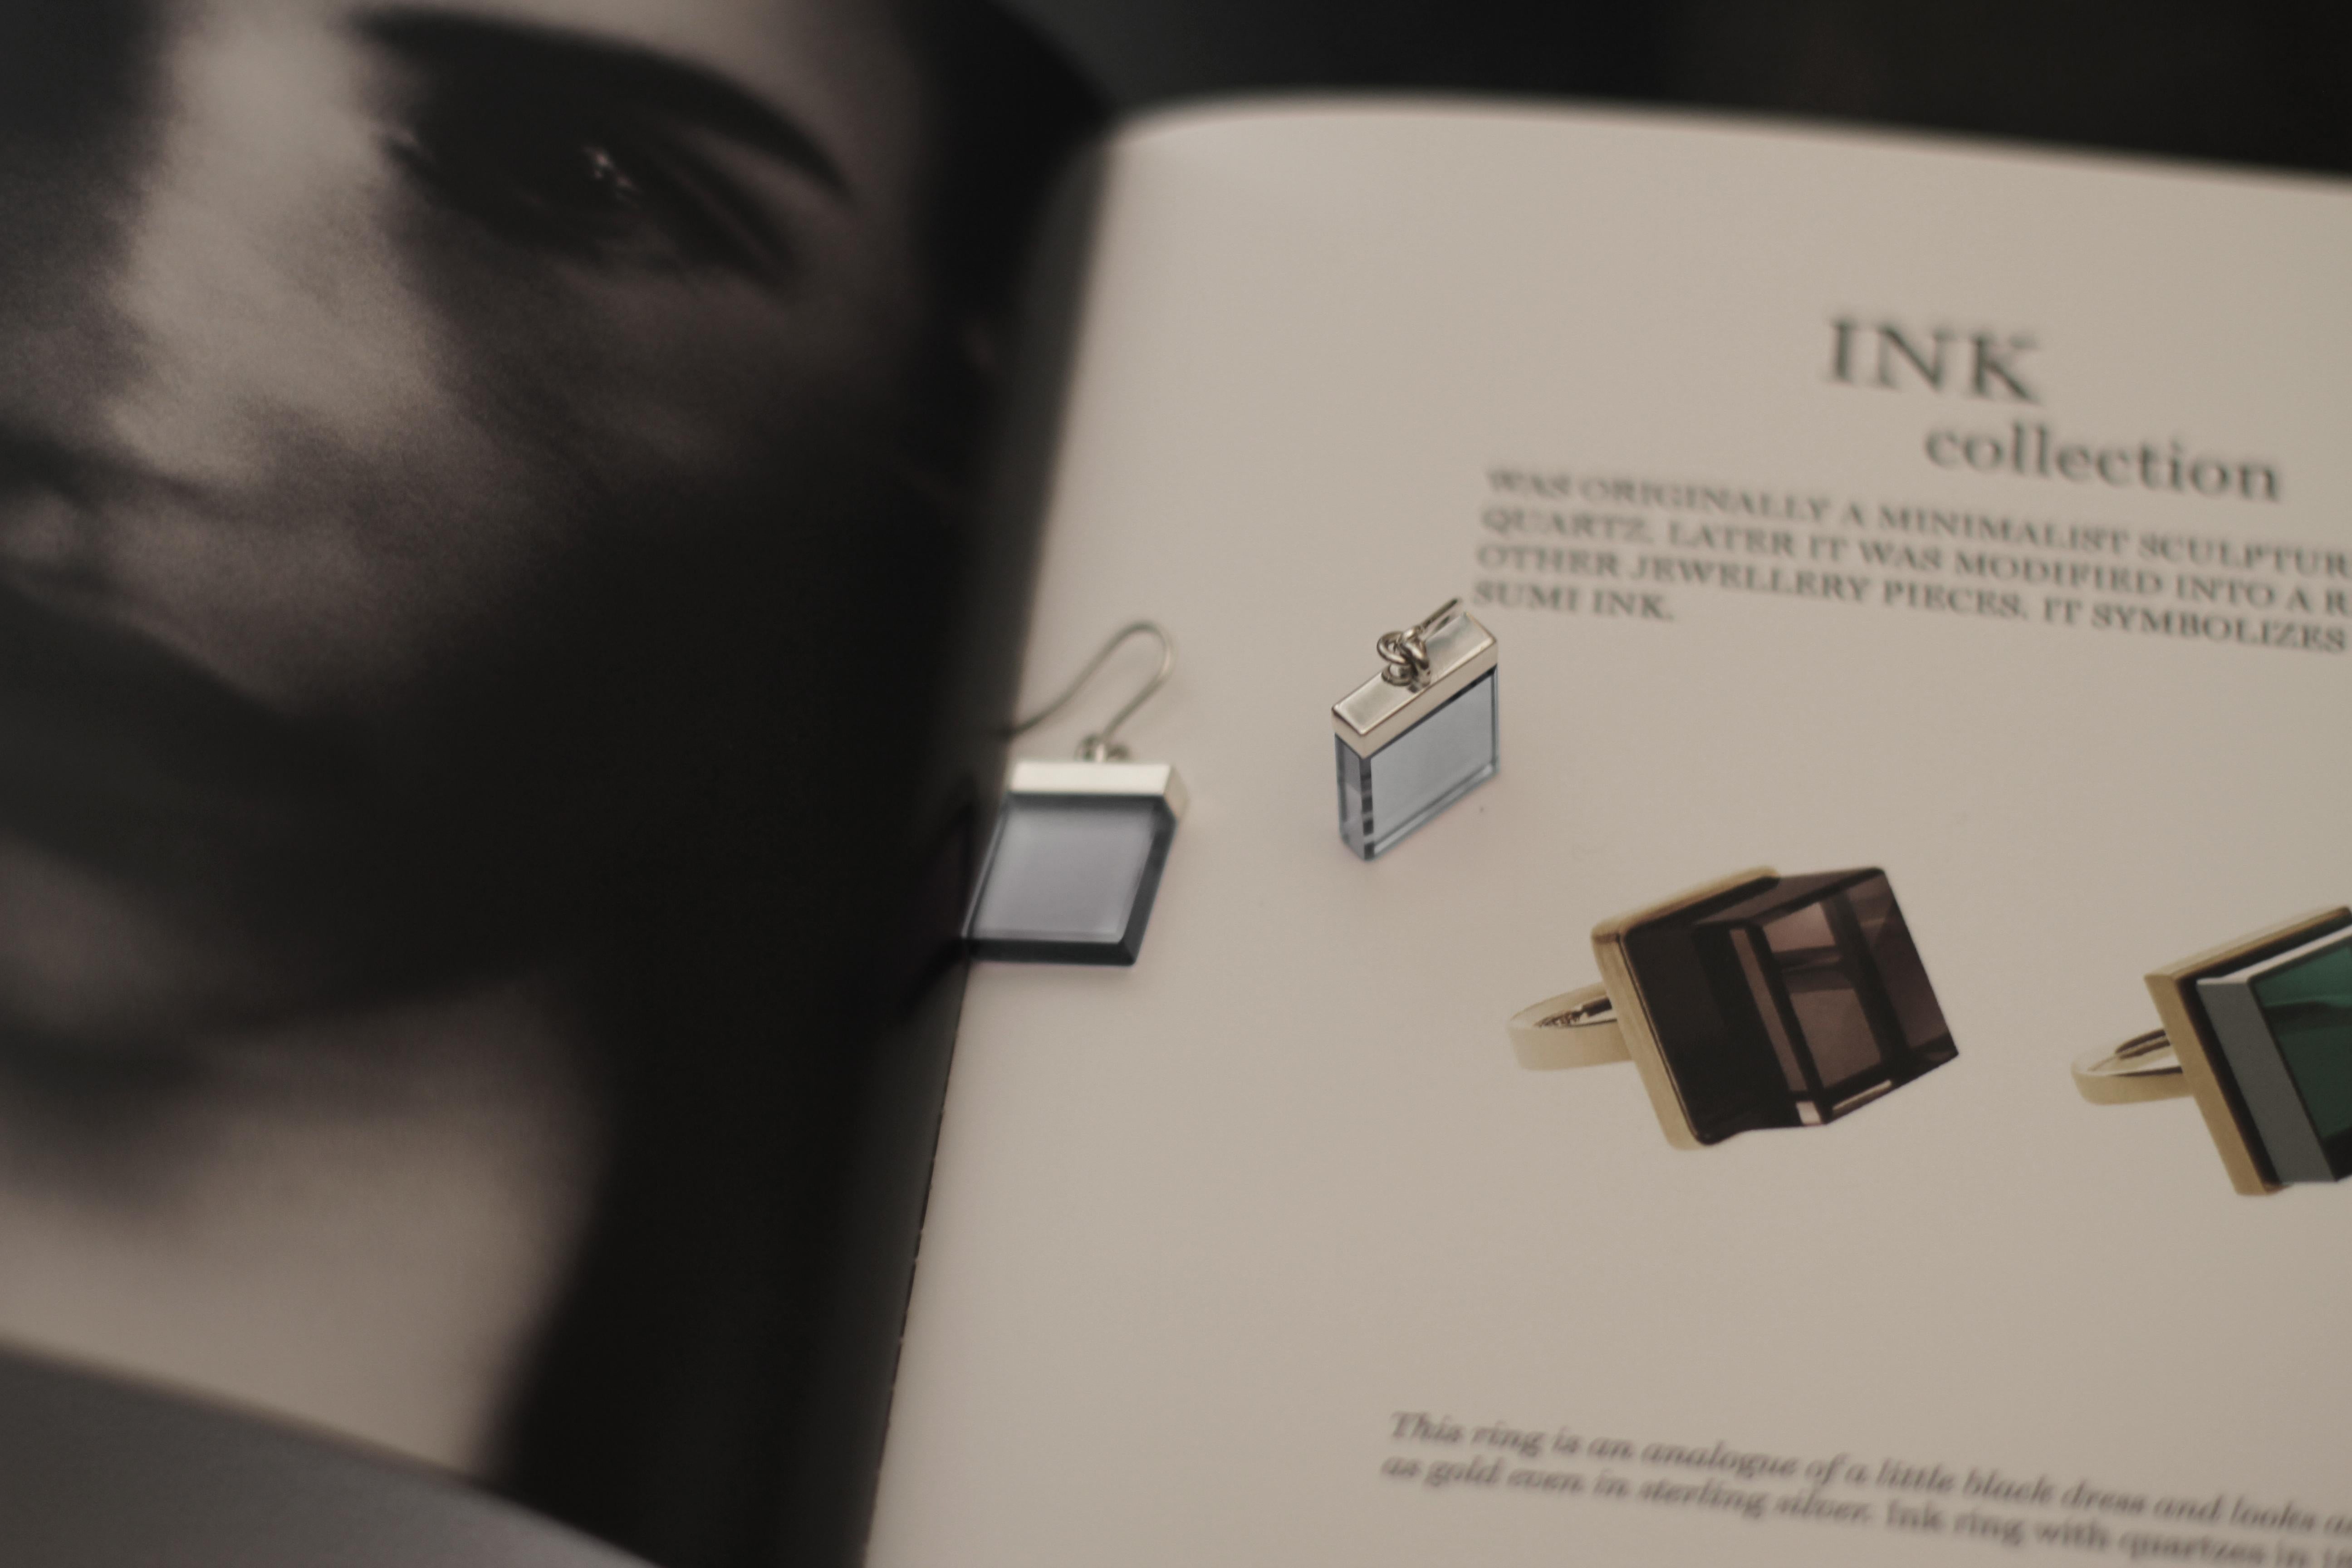 These earrings from the Ink collection have been featured in Harper's Bazaar UA and Vogue UA, and are made of 18 karat yellow gold in an Art Deco style designed by oil painter from Berlin, Polya Medvedeva.

The earrings have 15x15x3 mm blue natural